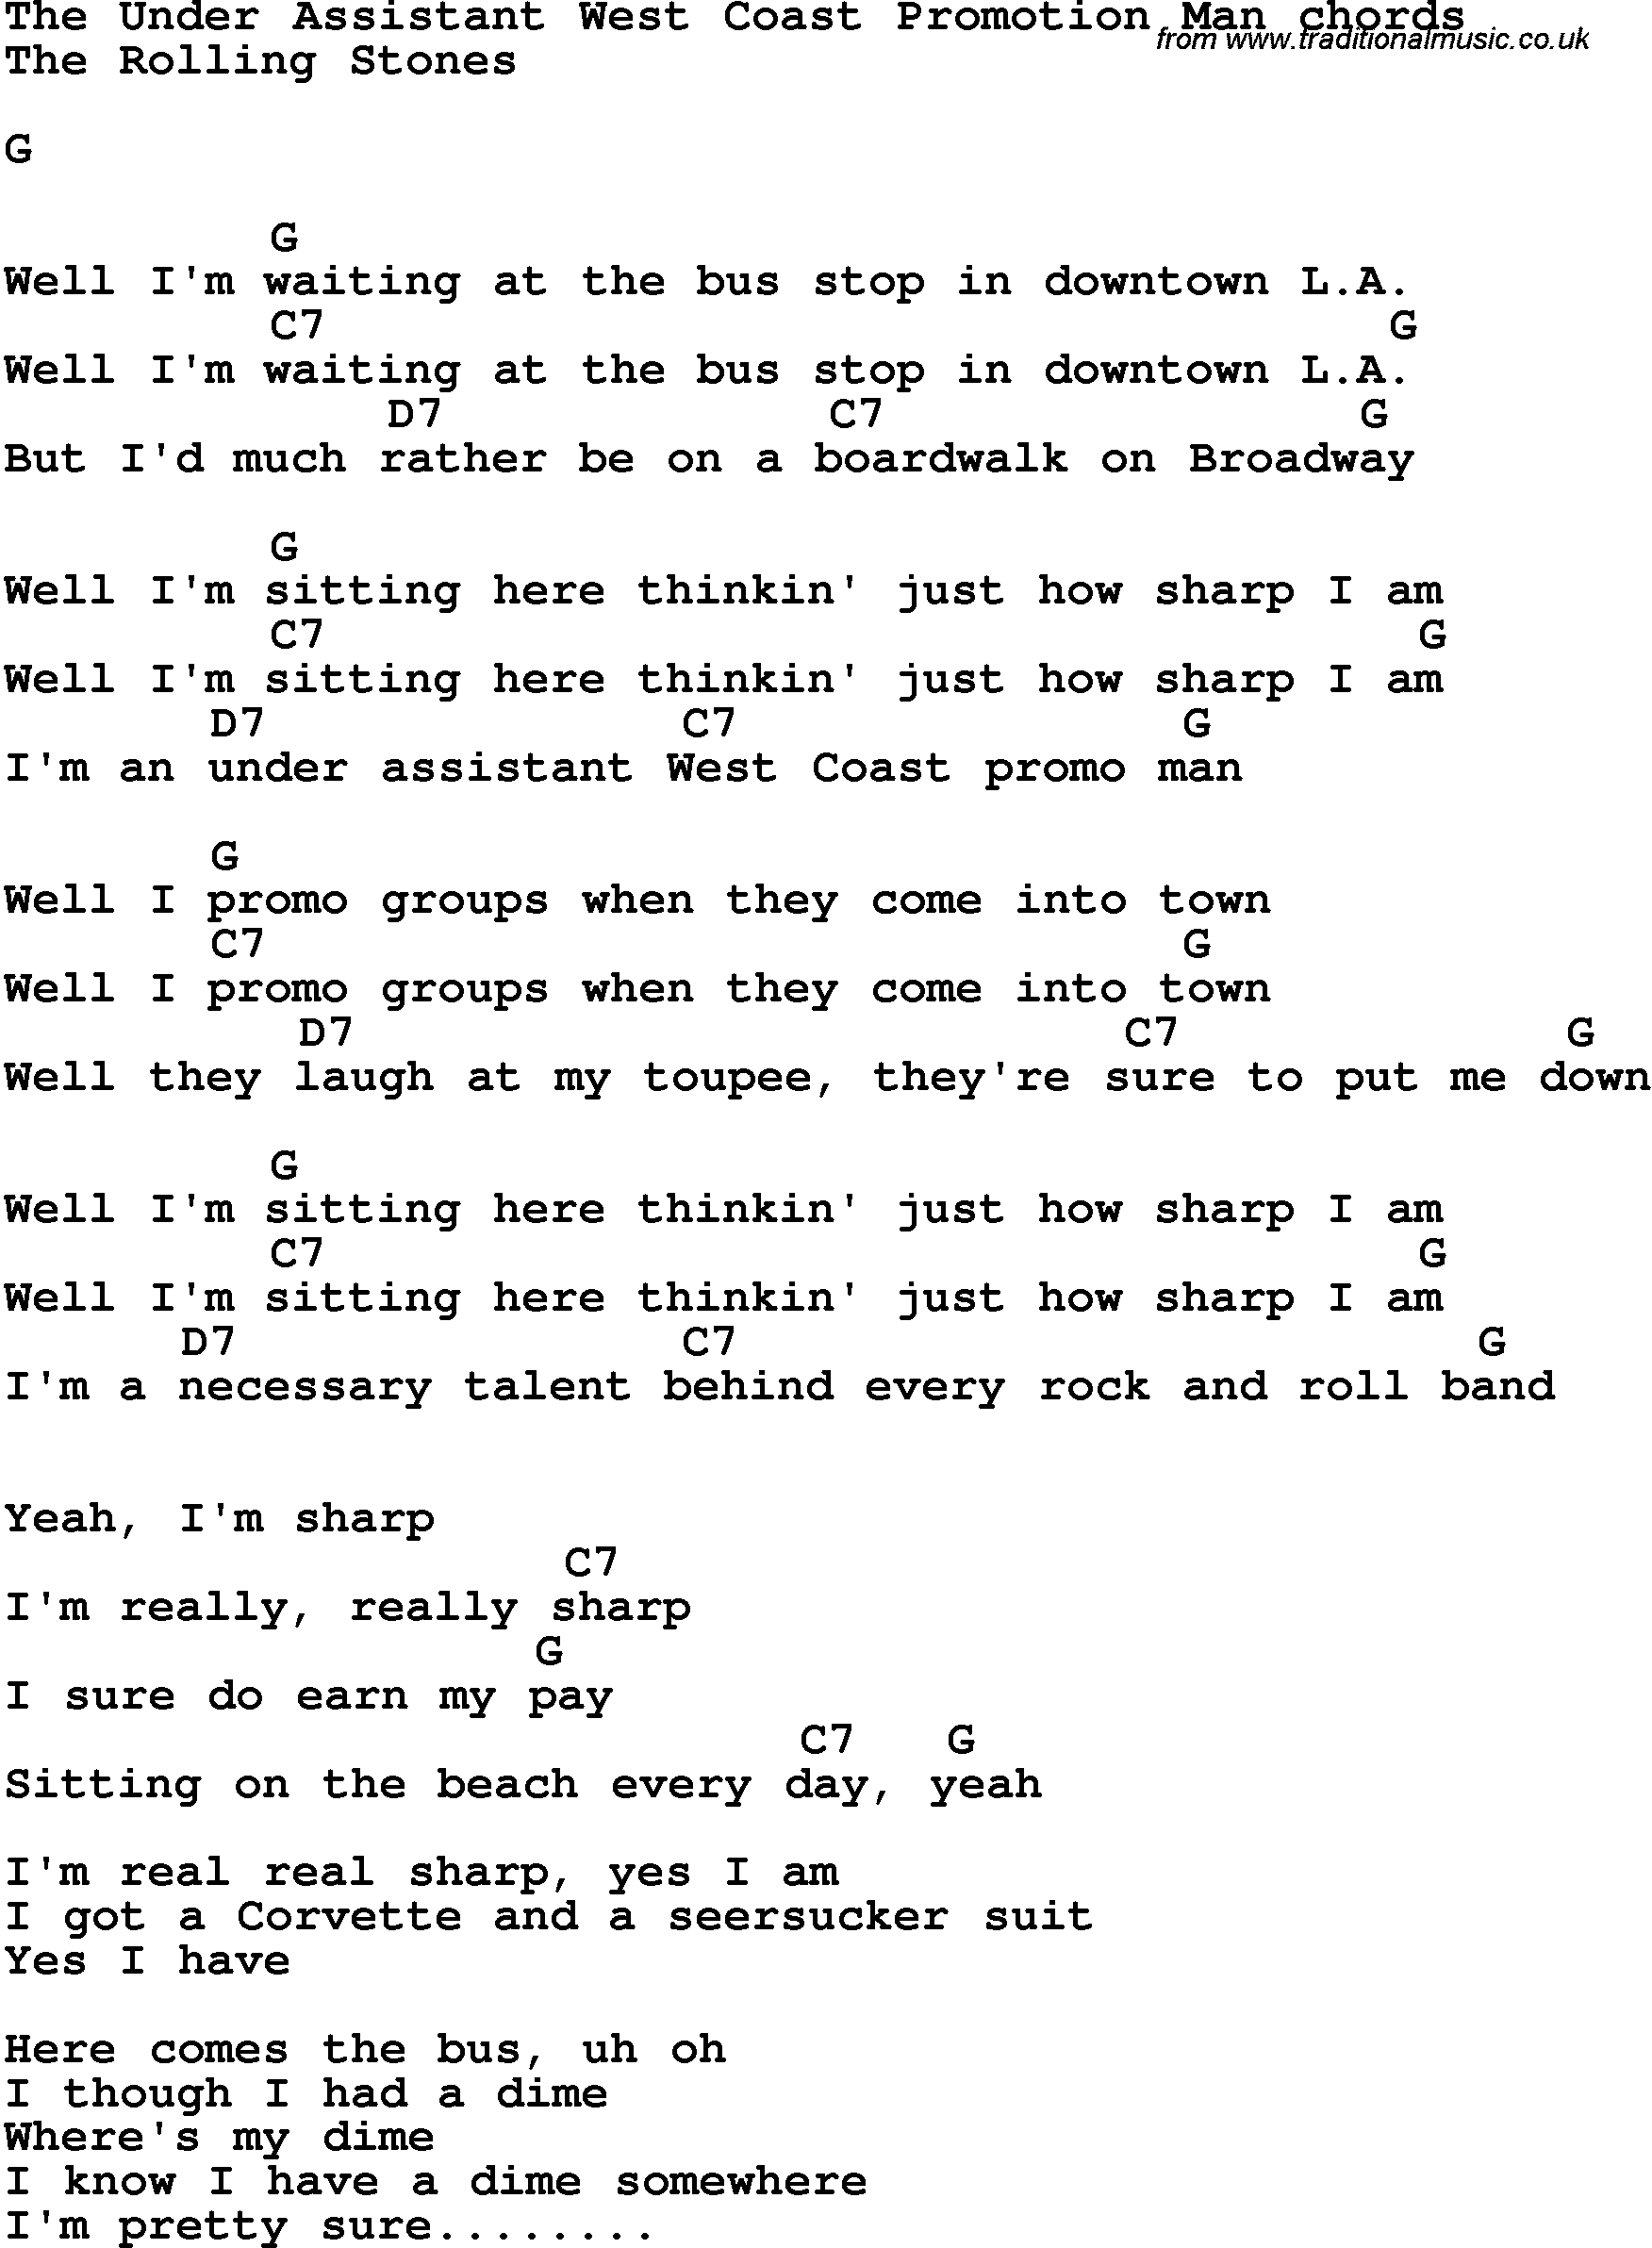 Song Lyrics with guitar chords for The Under Assistant West Coast Promotion Man